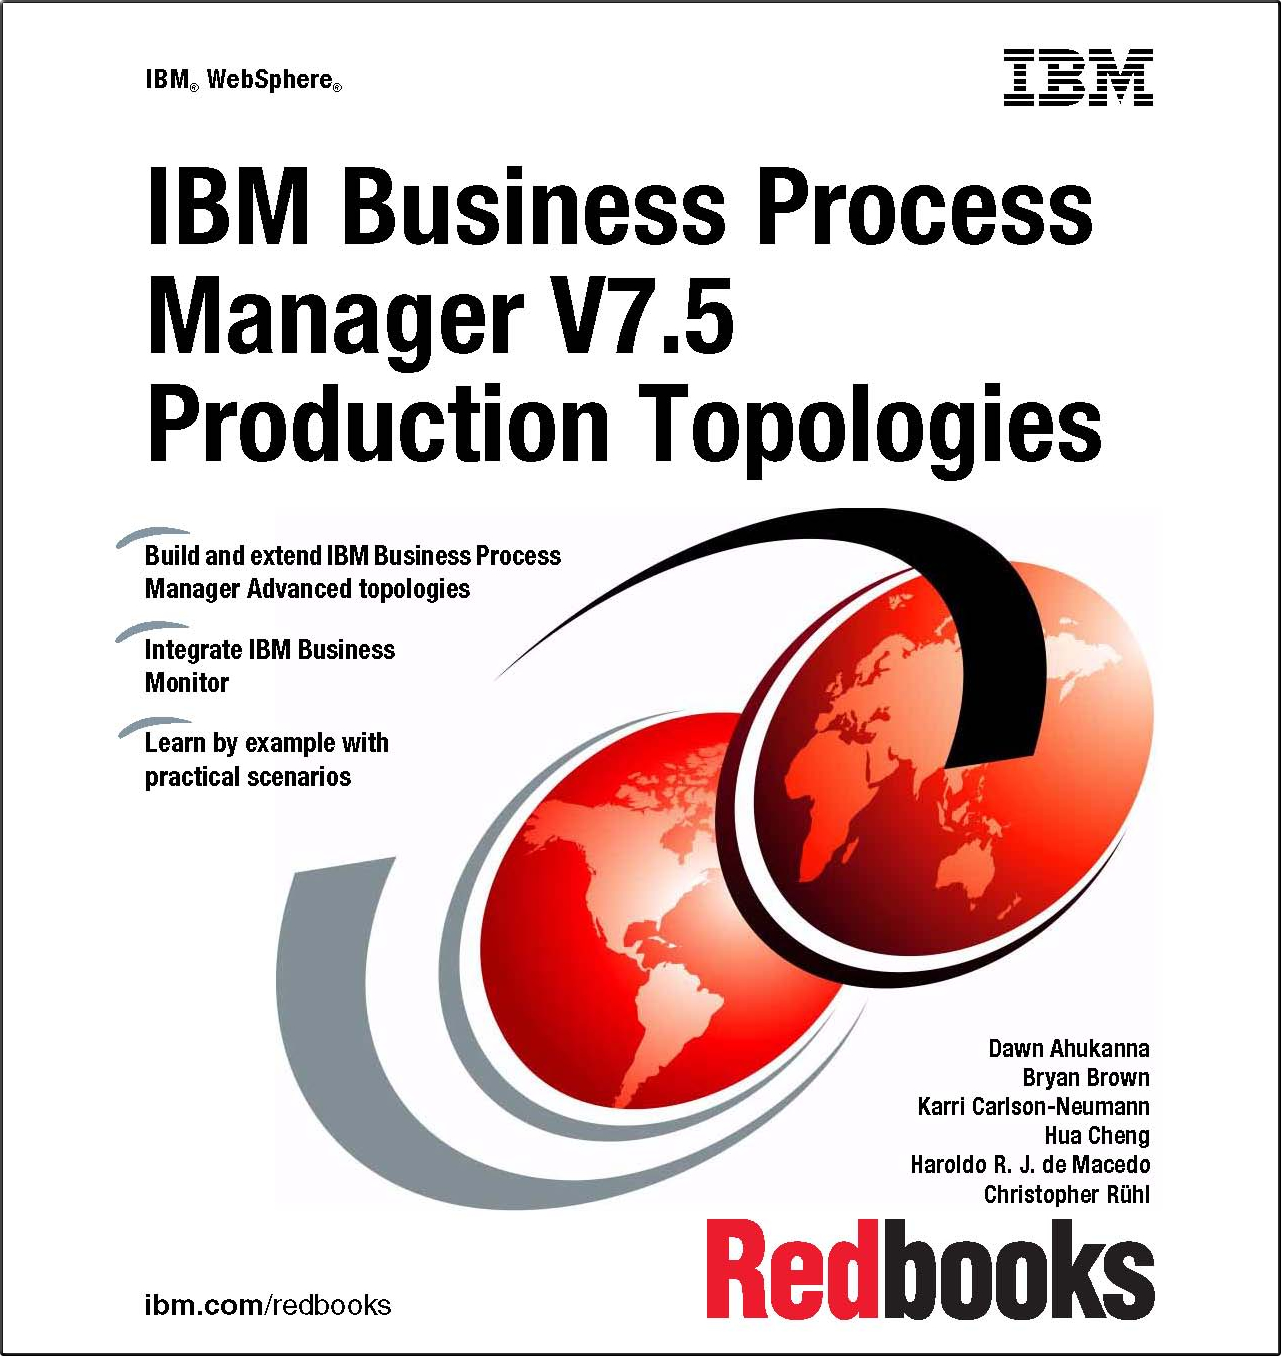 IT Security Policy Management Usage Patterns Using IBM Tivoli Security Policy Manager